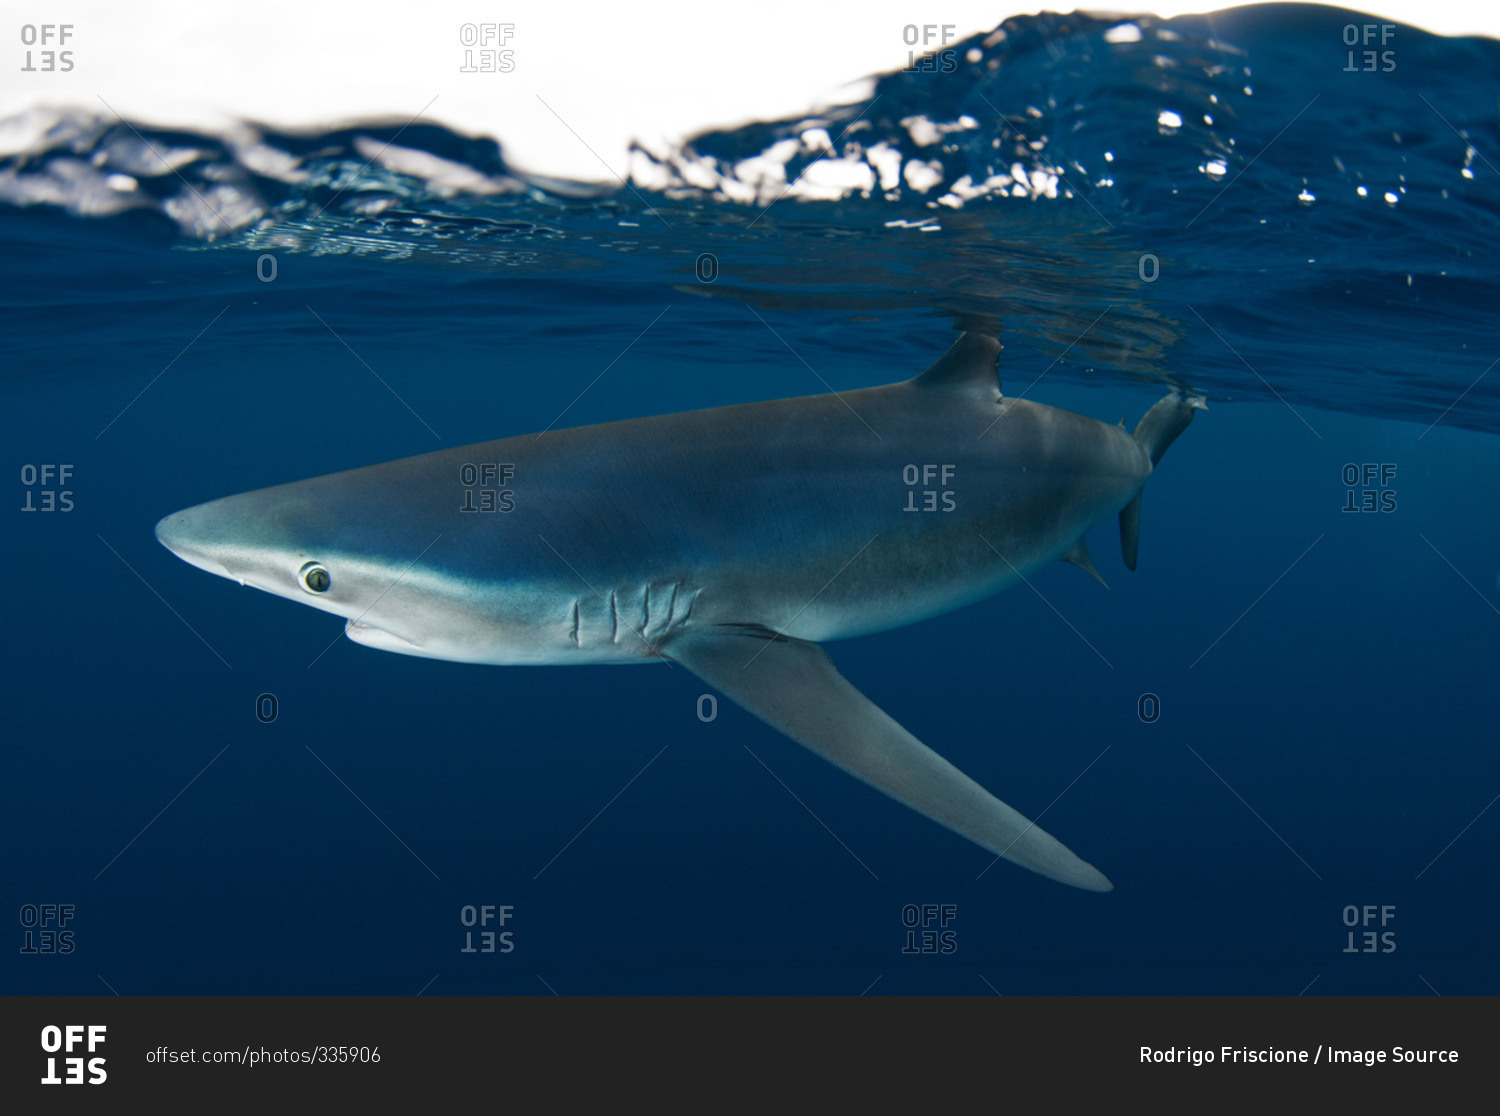 Underwater side view of blue shark, Guadalupe Island, Baja California, Mexico